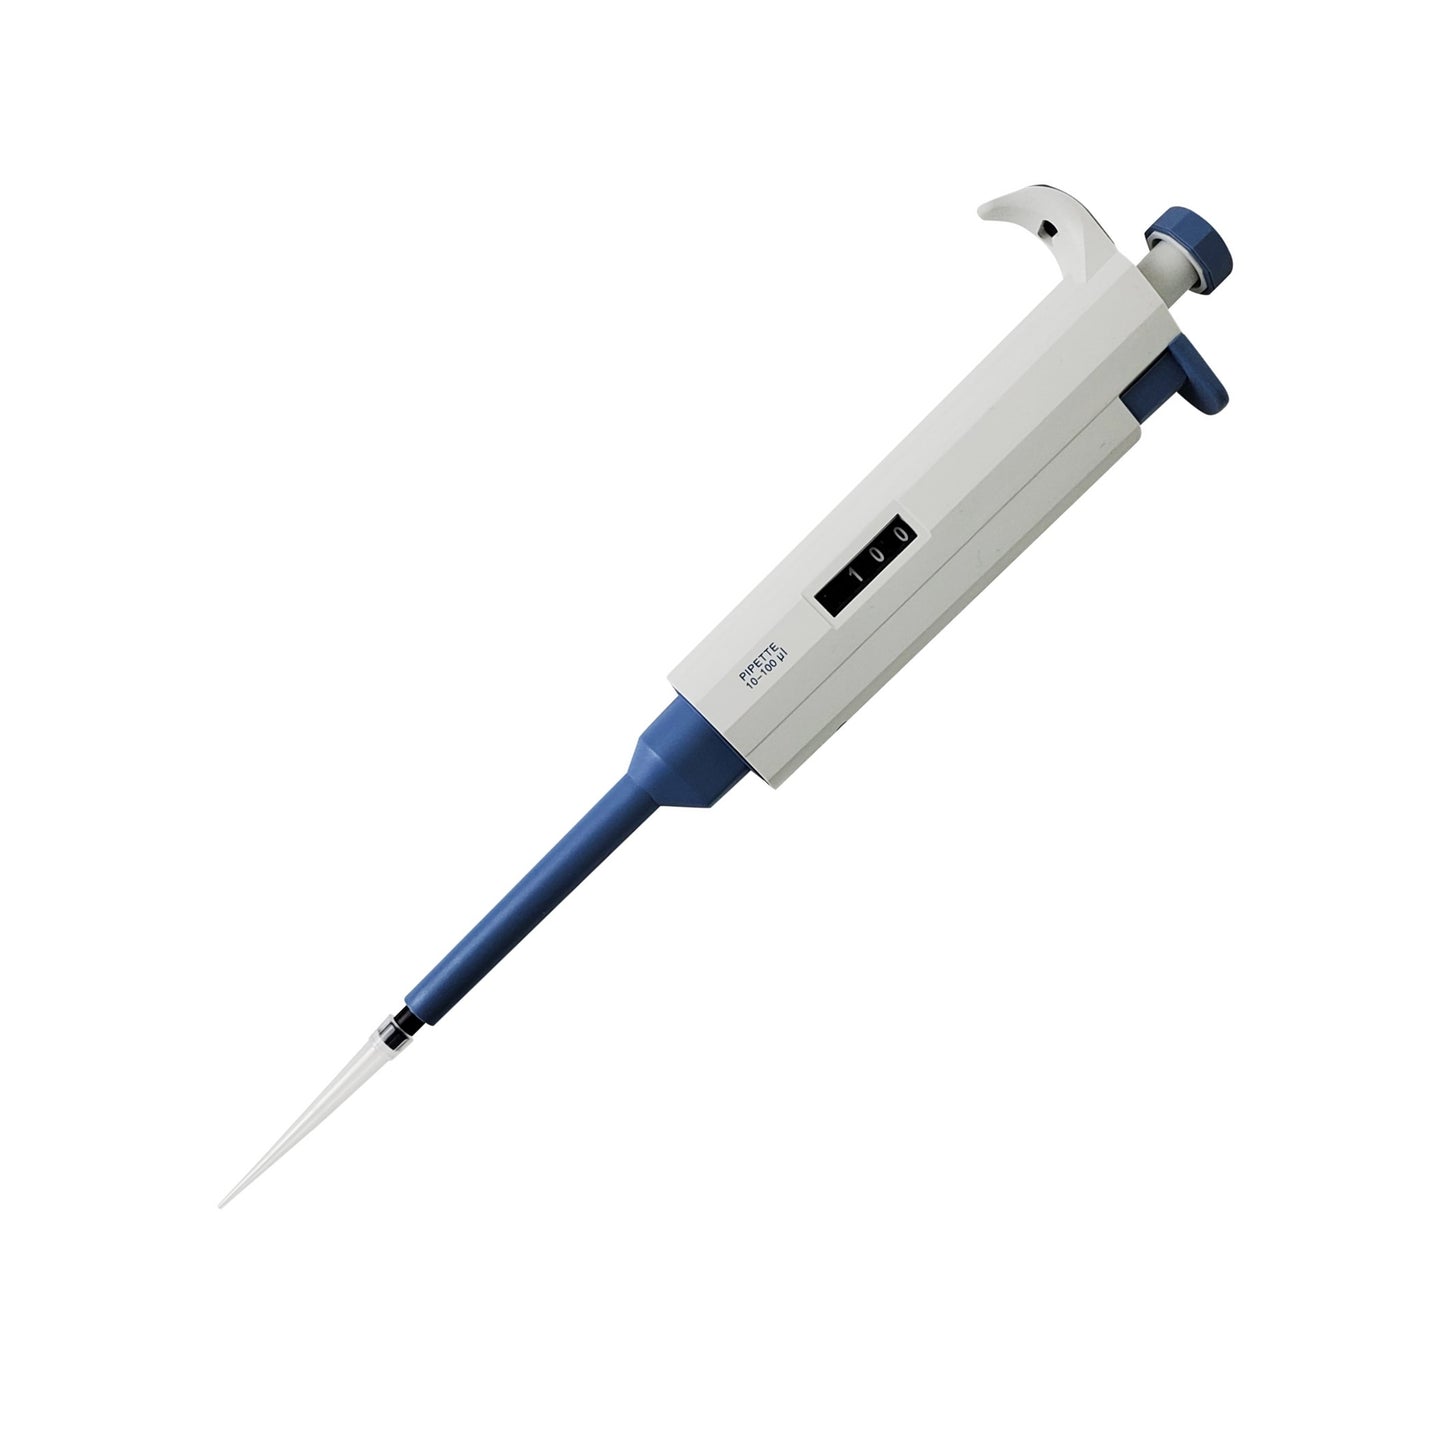 Variable Volume Single Channel Pipette